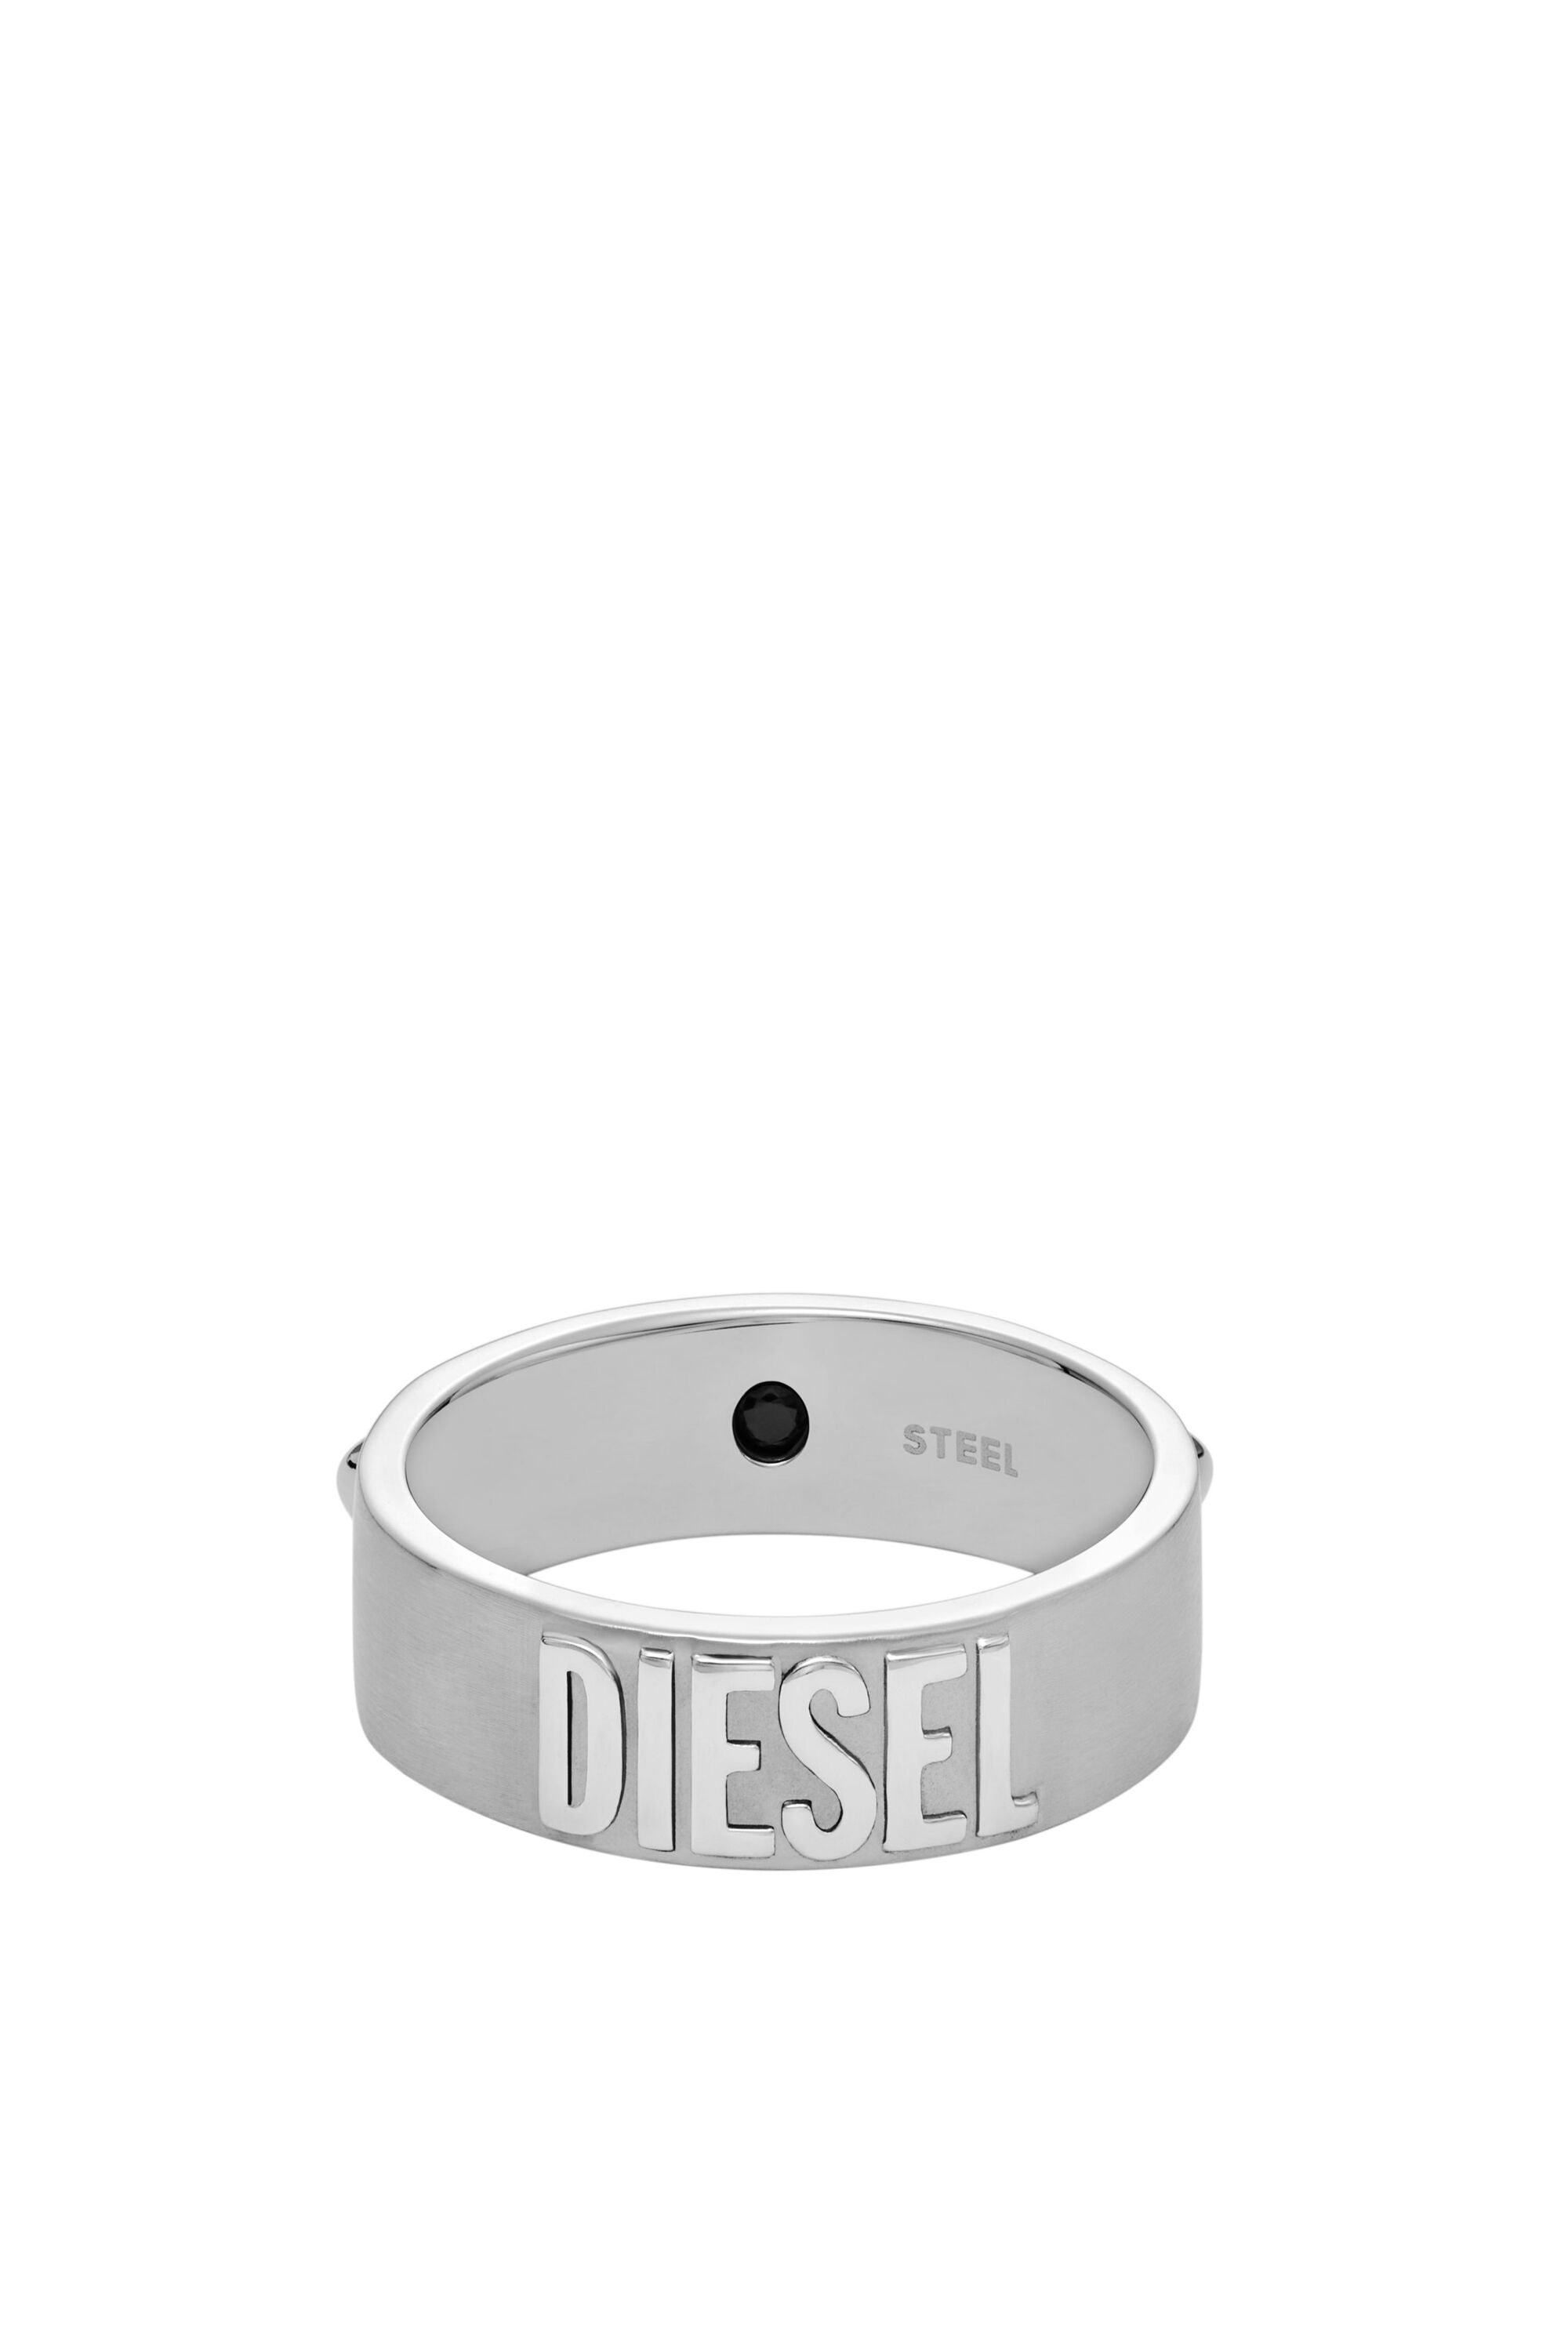 Diesel's band ring features stainless steel | Diesel DX1449